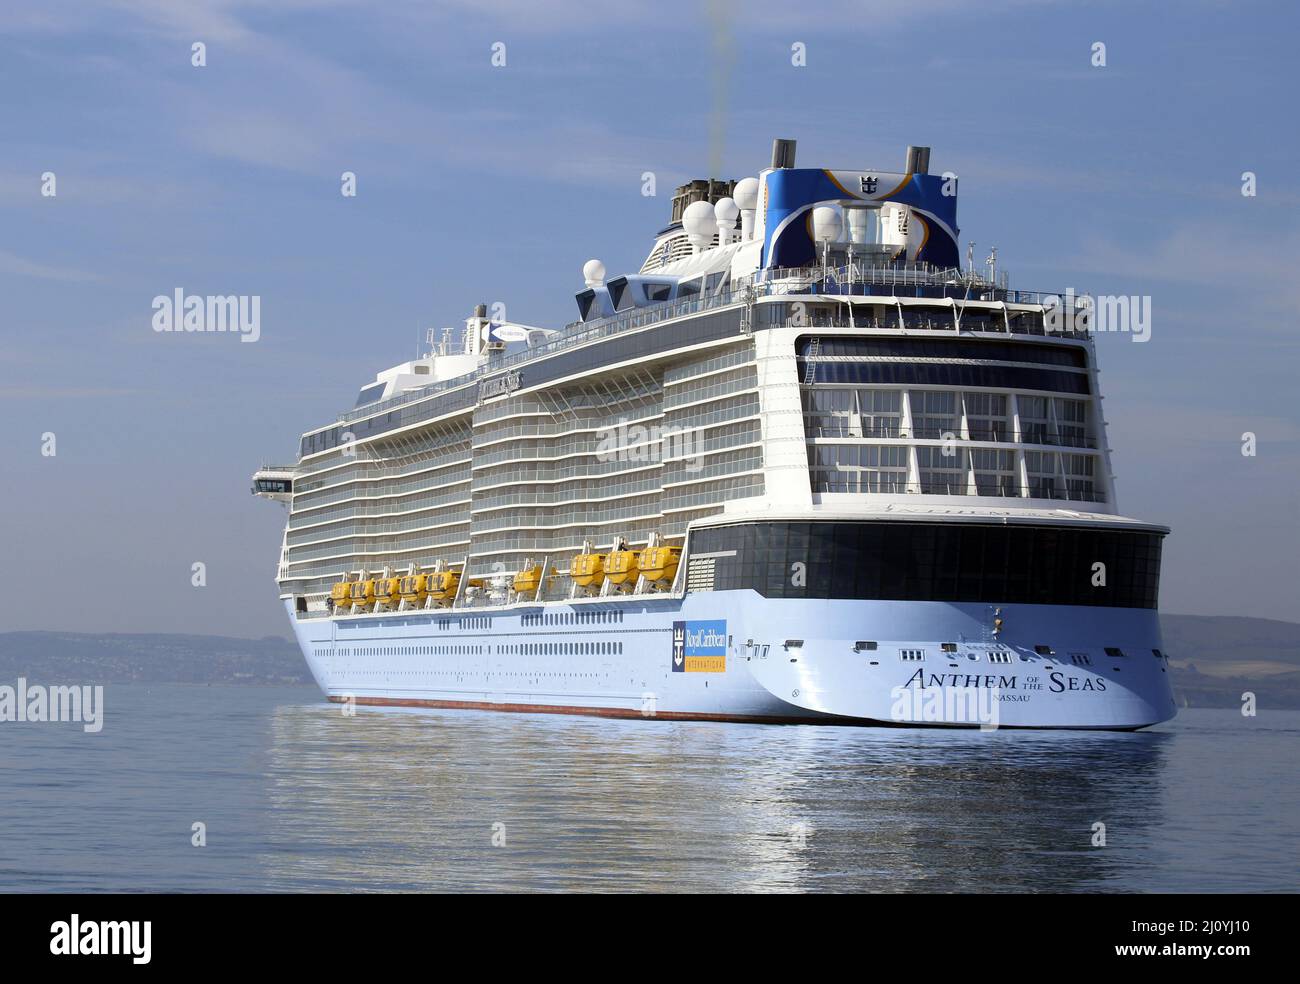 Royal Caribbean Anthem of the Seas anchored in Studland Bay off Poole Harbour due to COVID-19 restrictions on travel. April 2021 Stock Photo